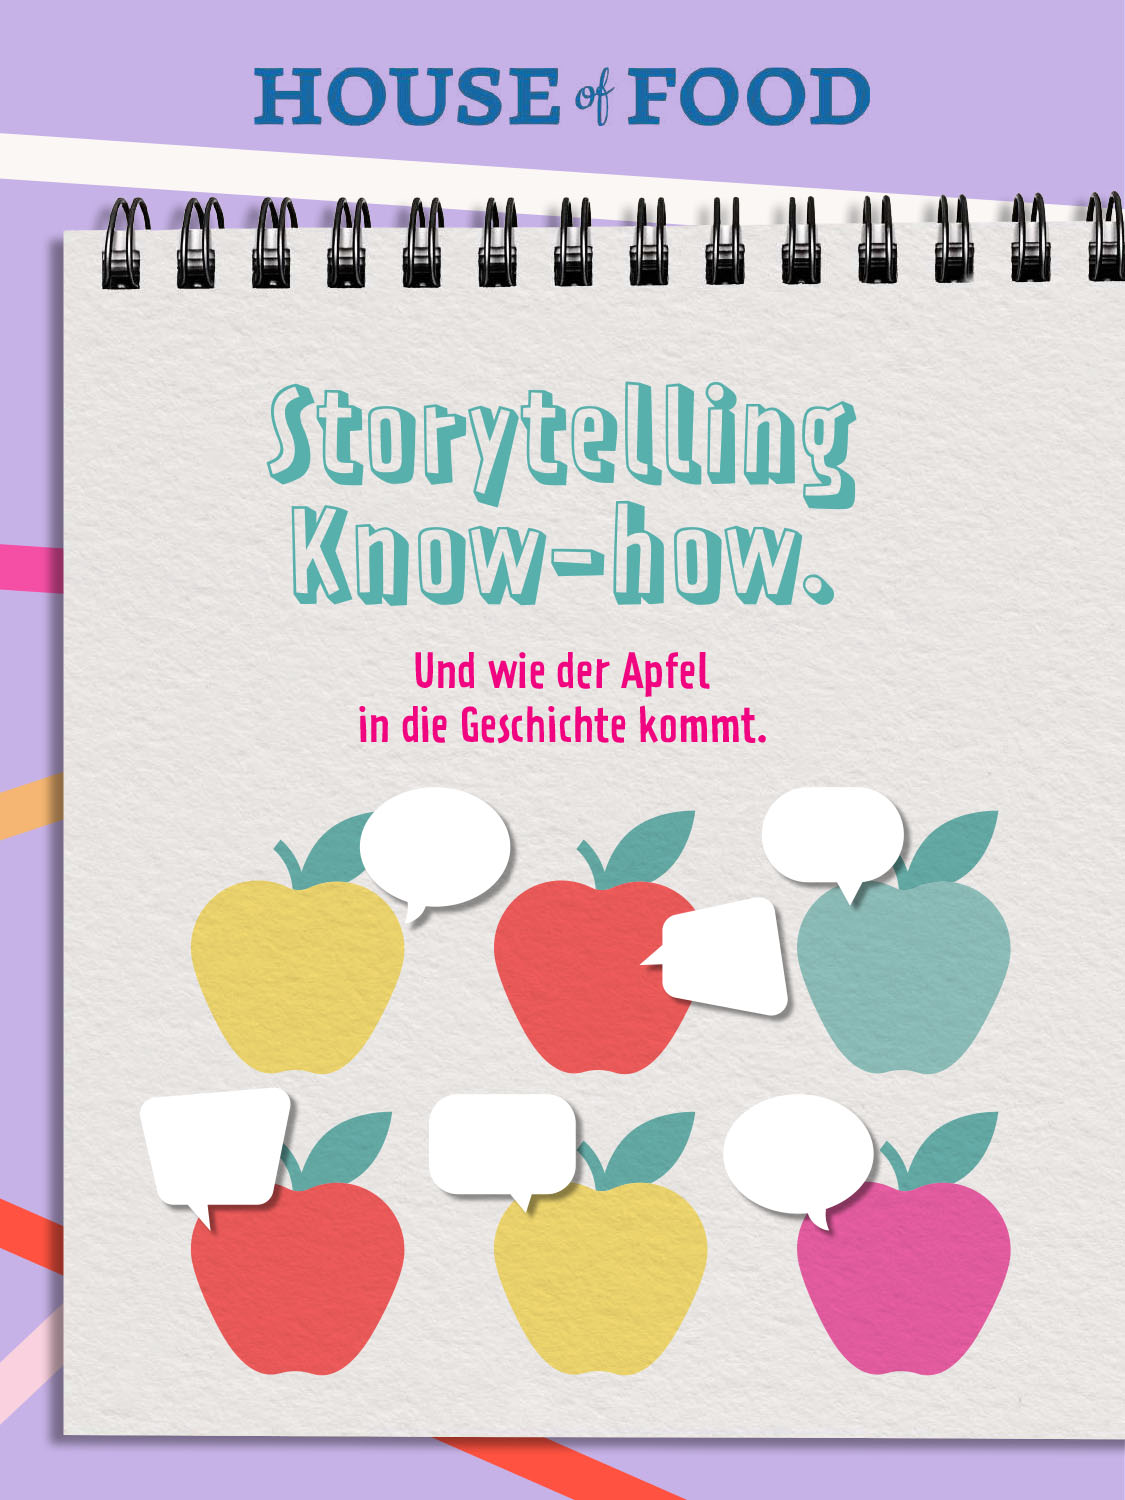 Whitepaper Storytelling Know-how | House of Food